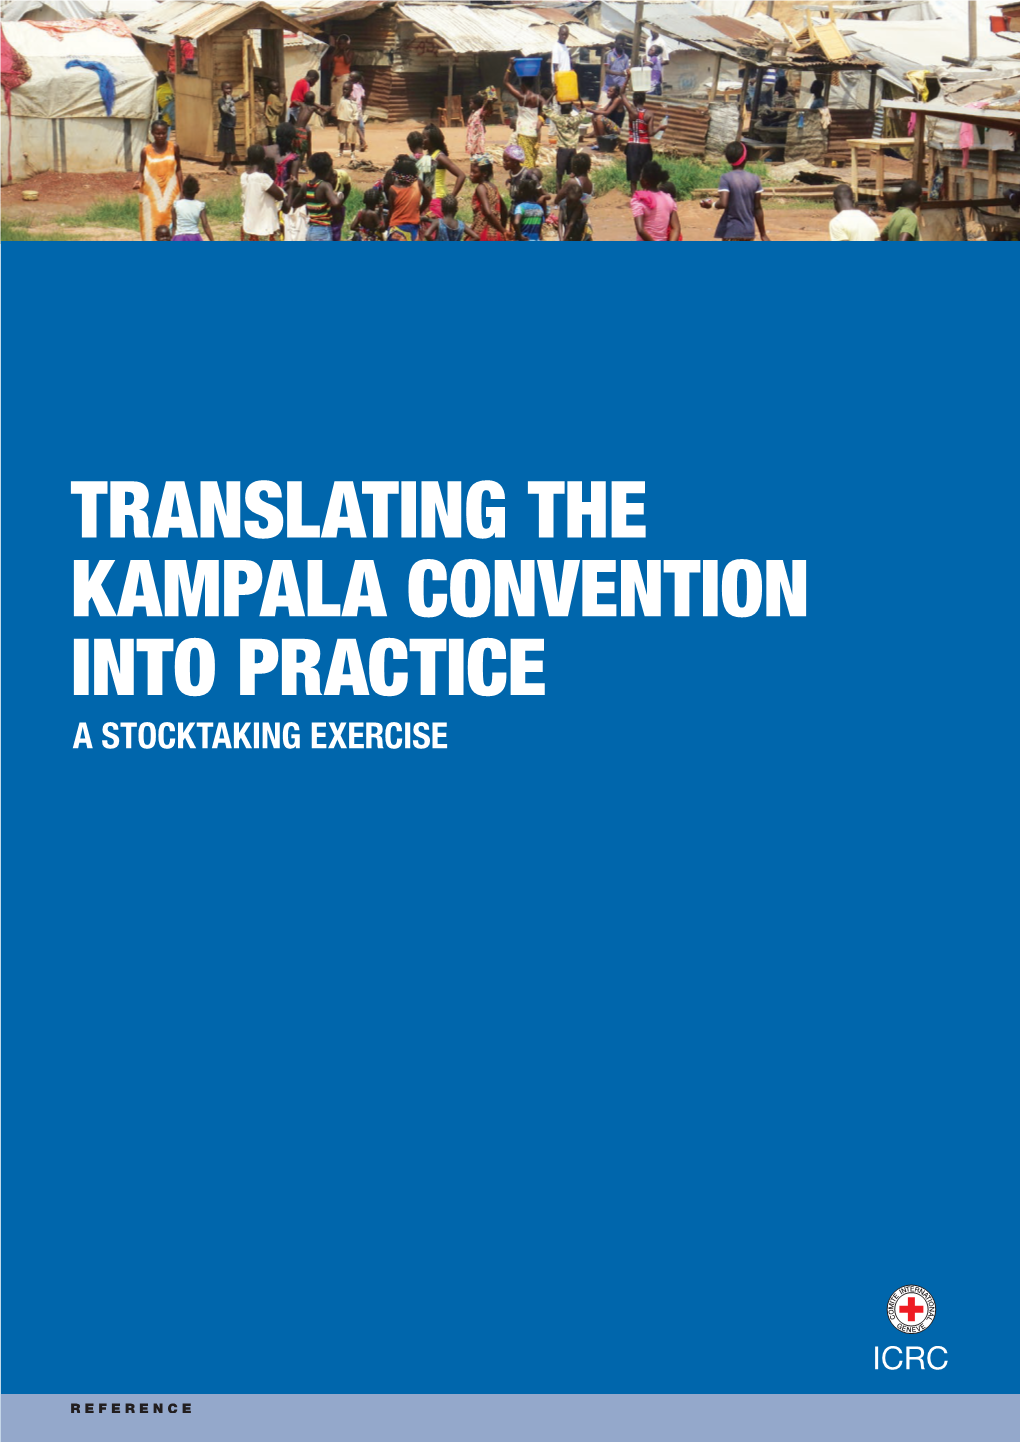 Moving Forward on Translating the Kampala Convention Into Practice